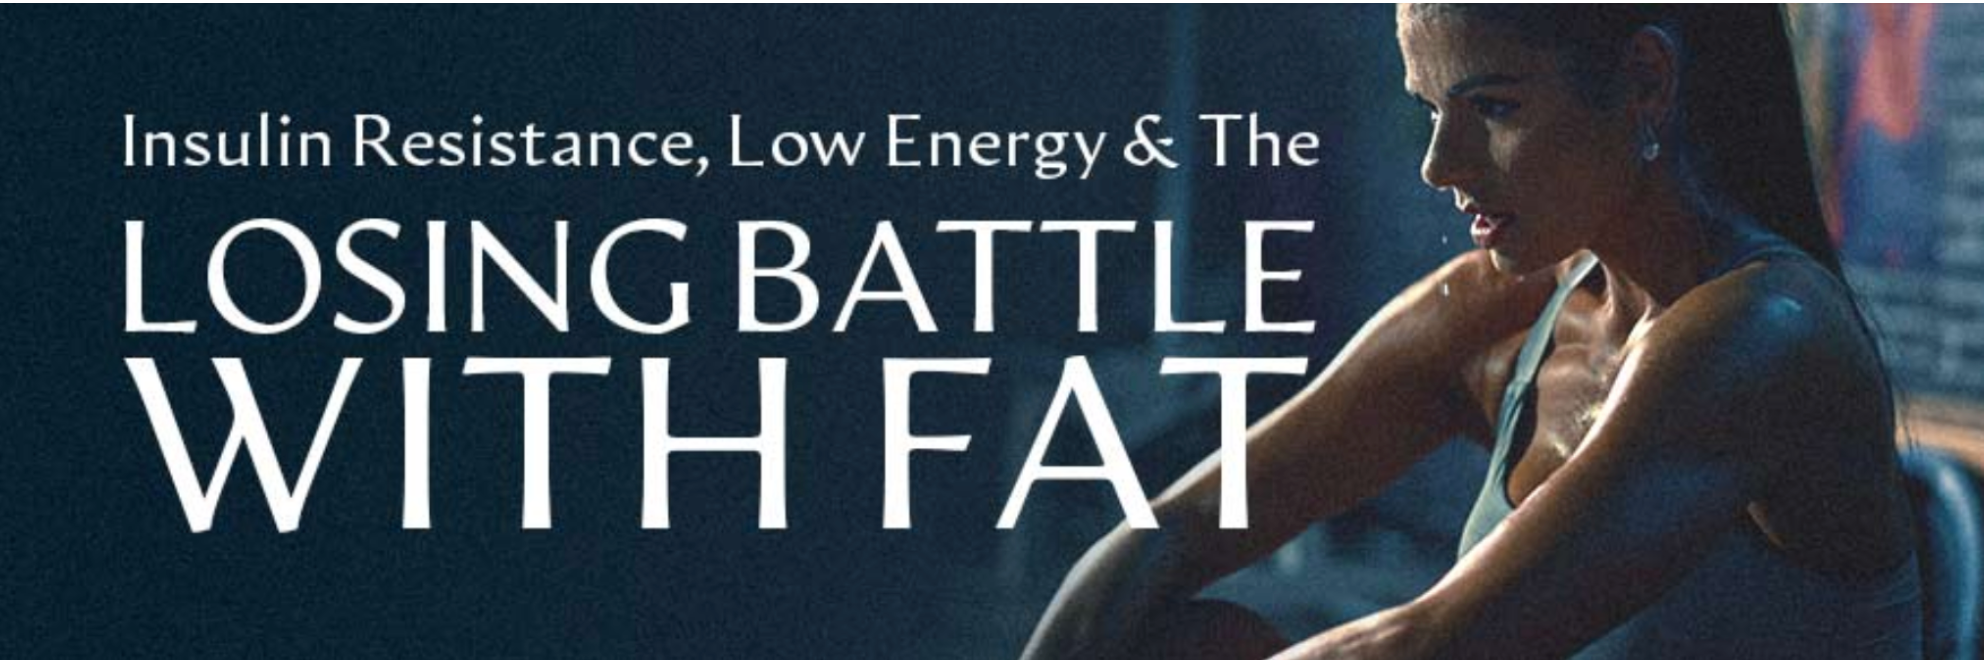 Insulin Resistance, Low Energy & The Losing Battle With Fat